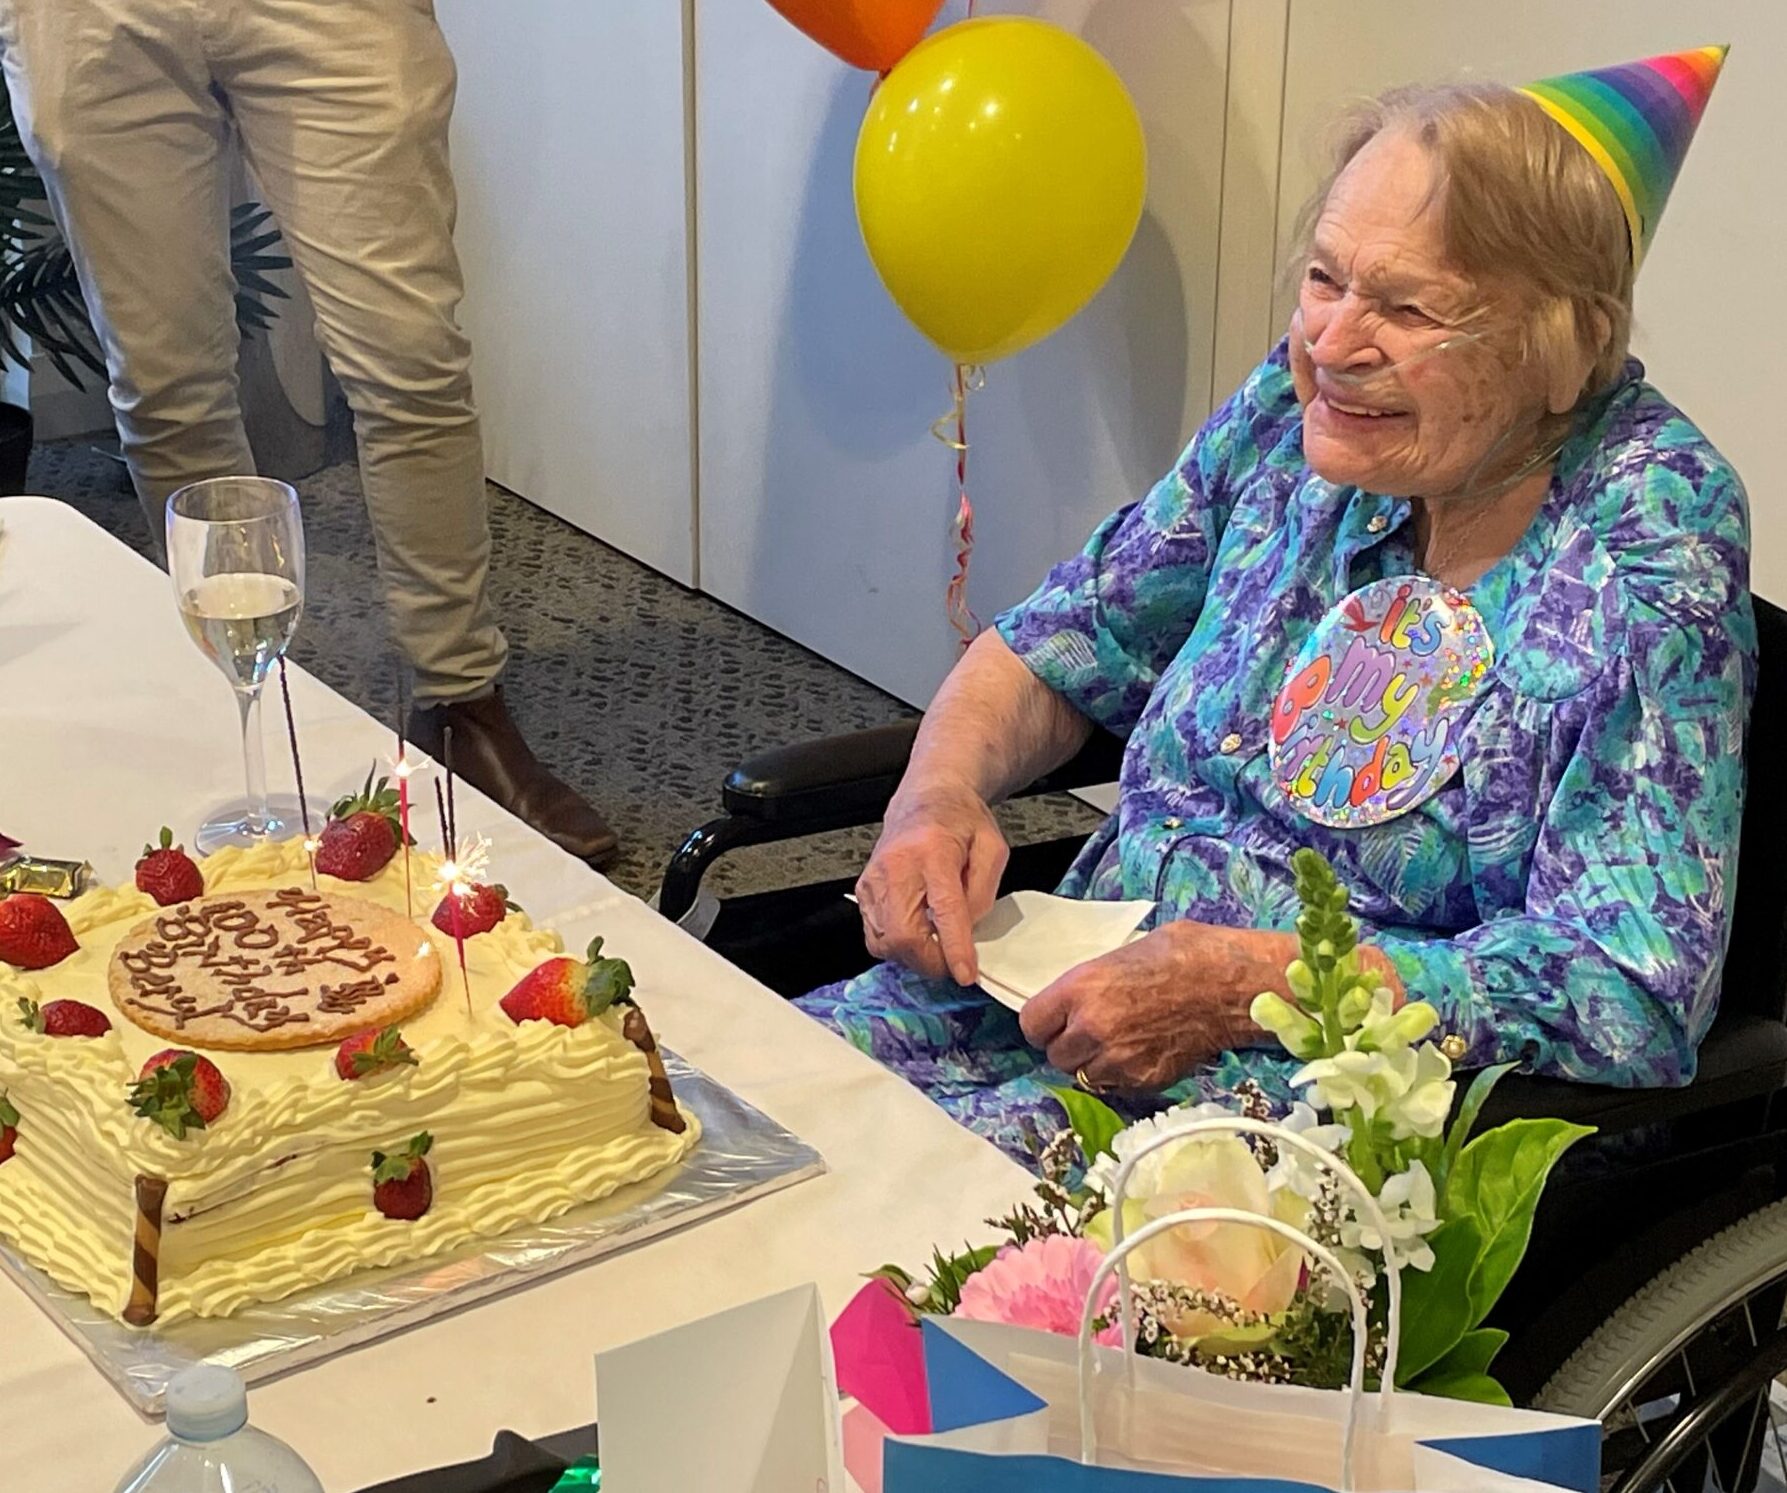 Warrigal resident celebrating a birthday with friends and staff.